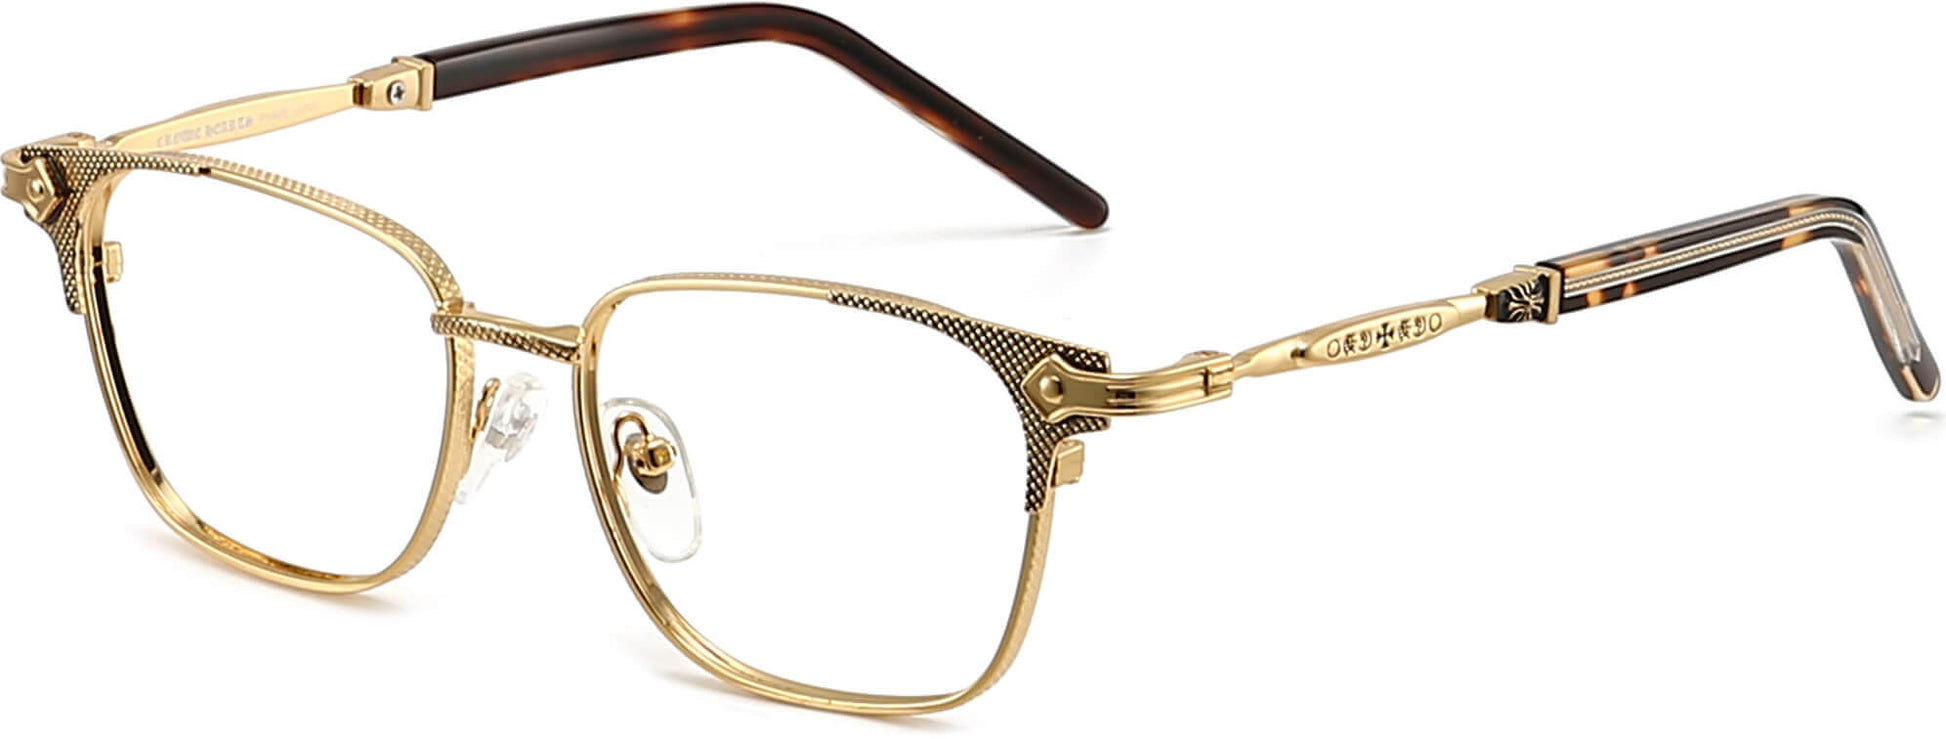 Devin Square Gold Eyeglasses from ANRRI, angle view